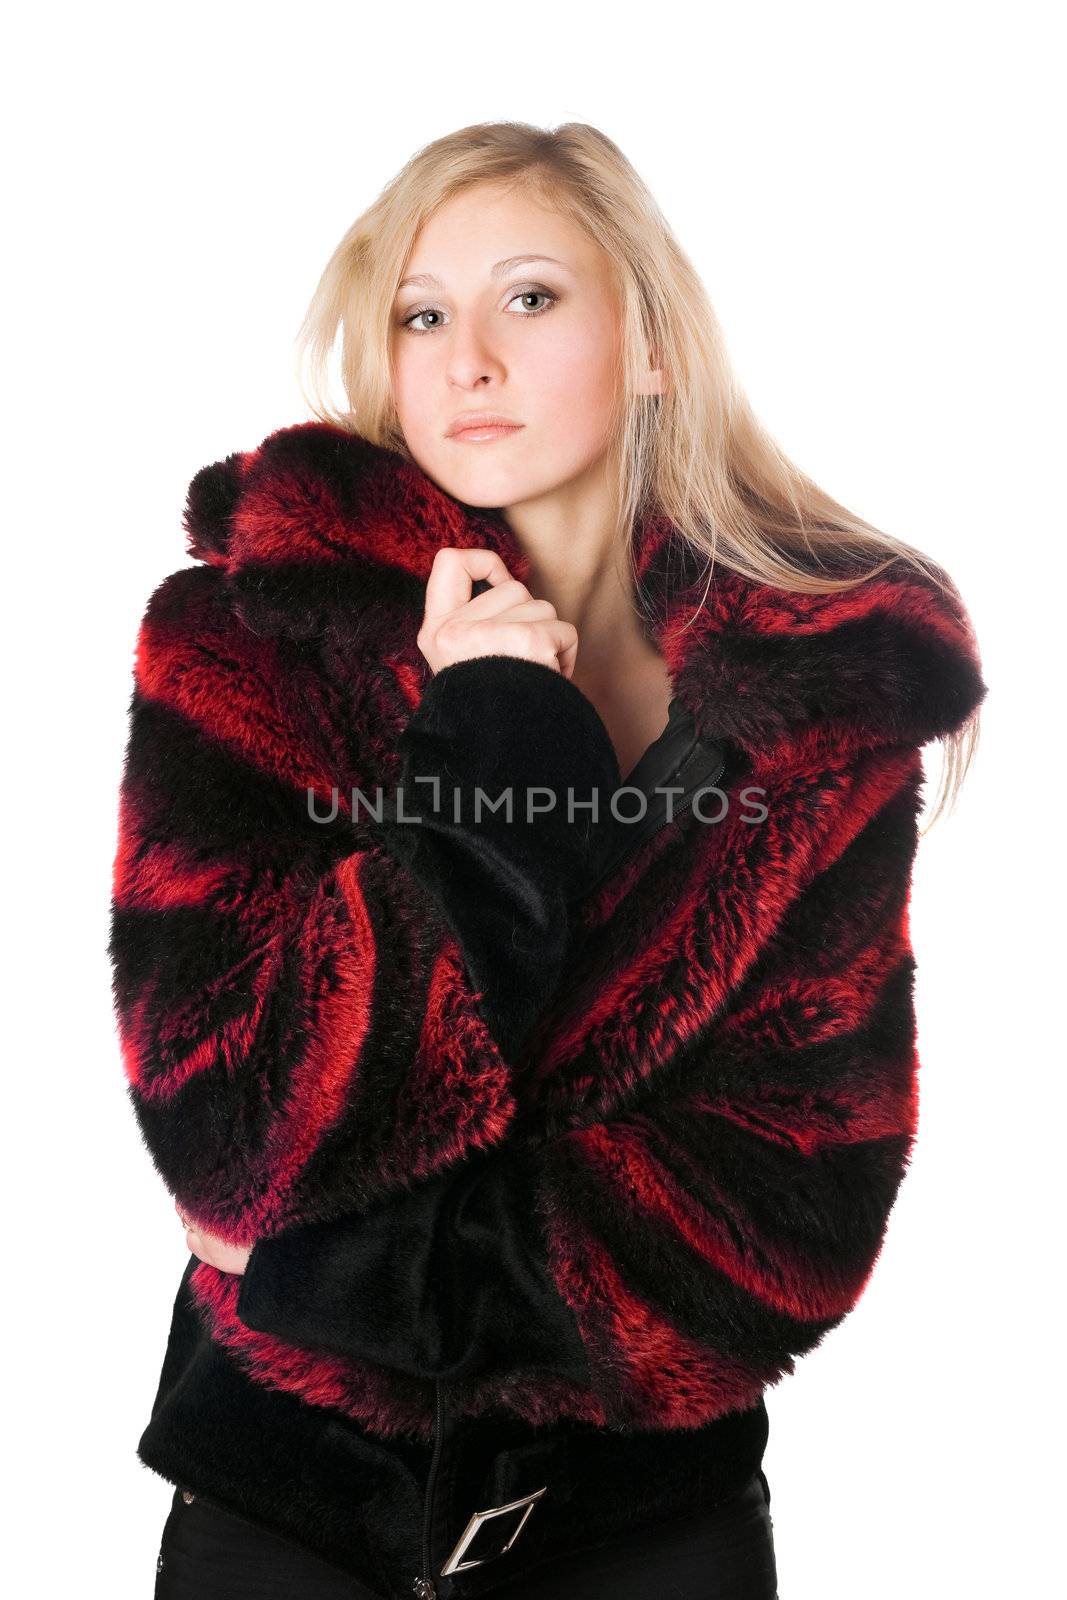 Young blond woman in a fur jacket. Isolated on white